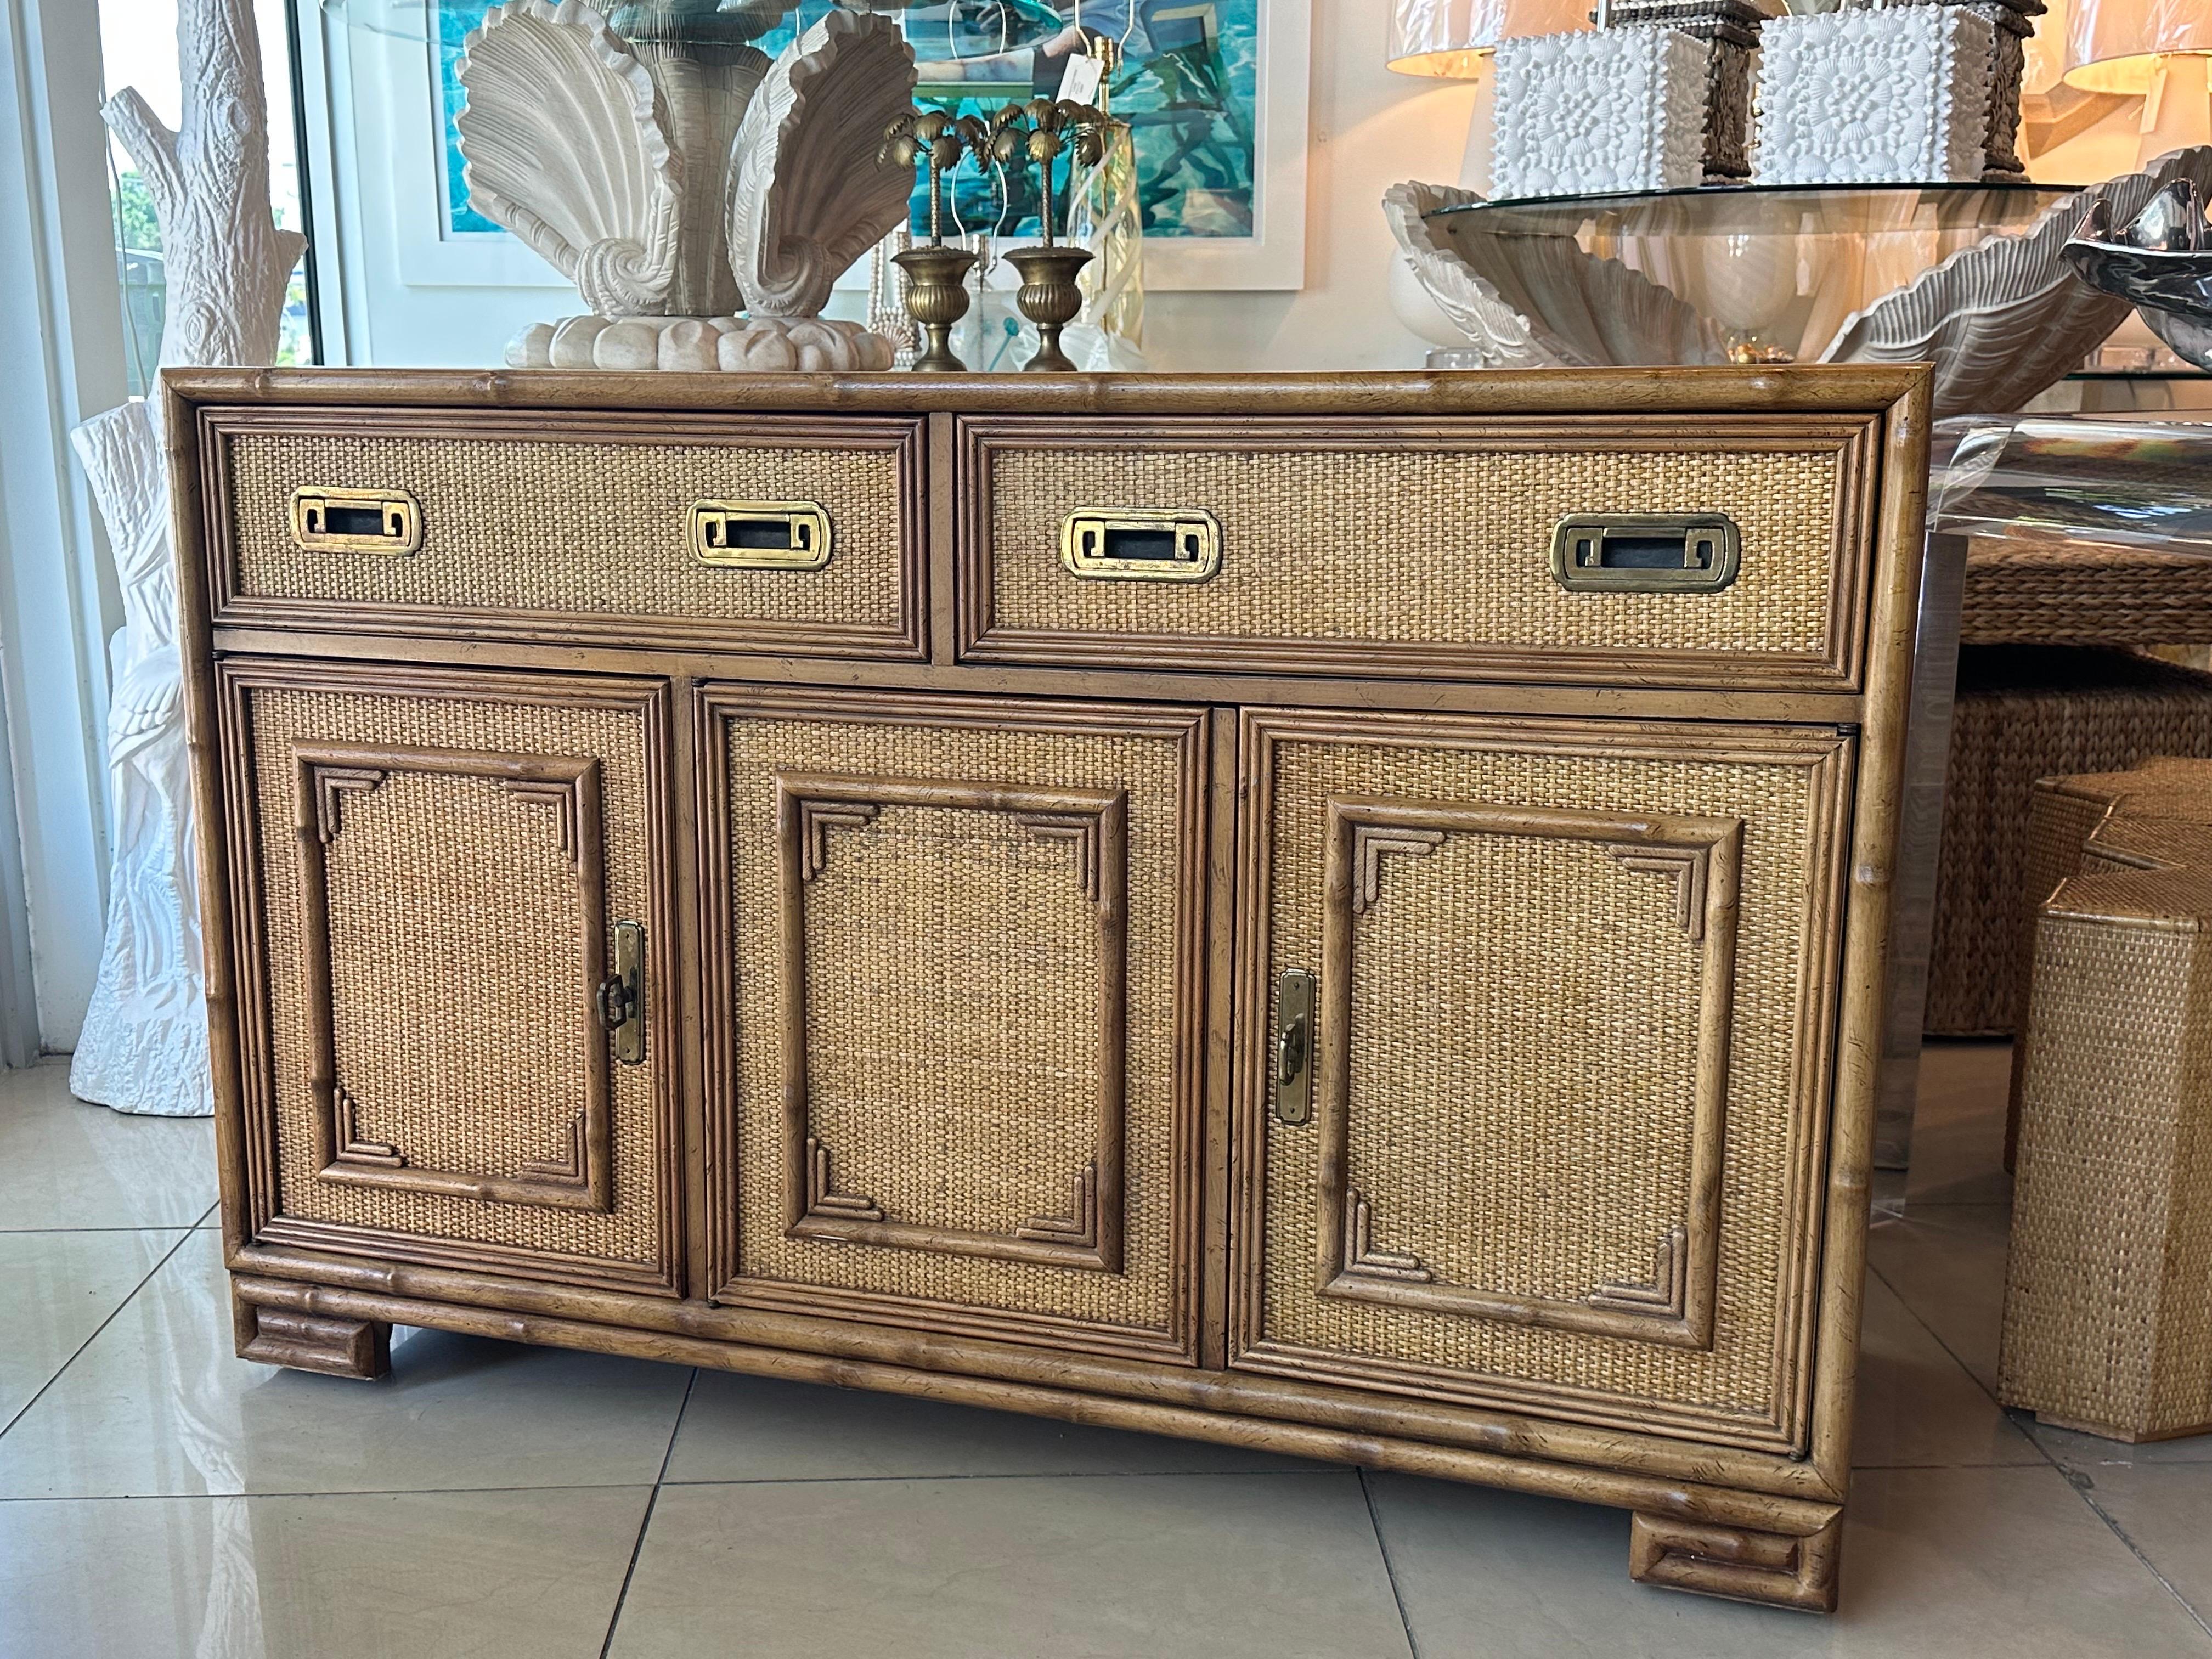 Vintage Drexel Woven Cane Bamboo Rattan Cabinet Credenza Buffet Dresser  In Good Condition For Sale In West Palm Beach, FL